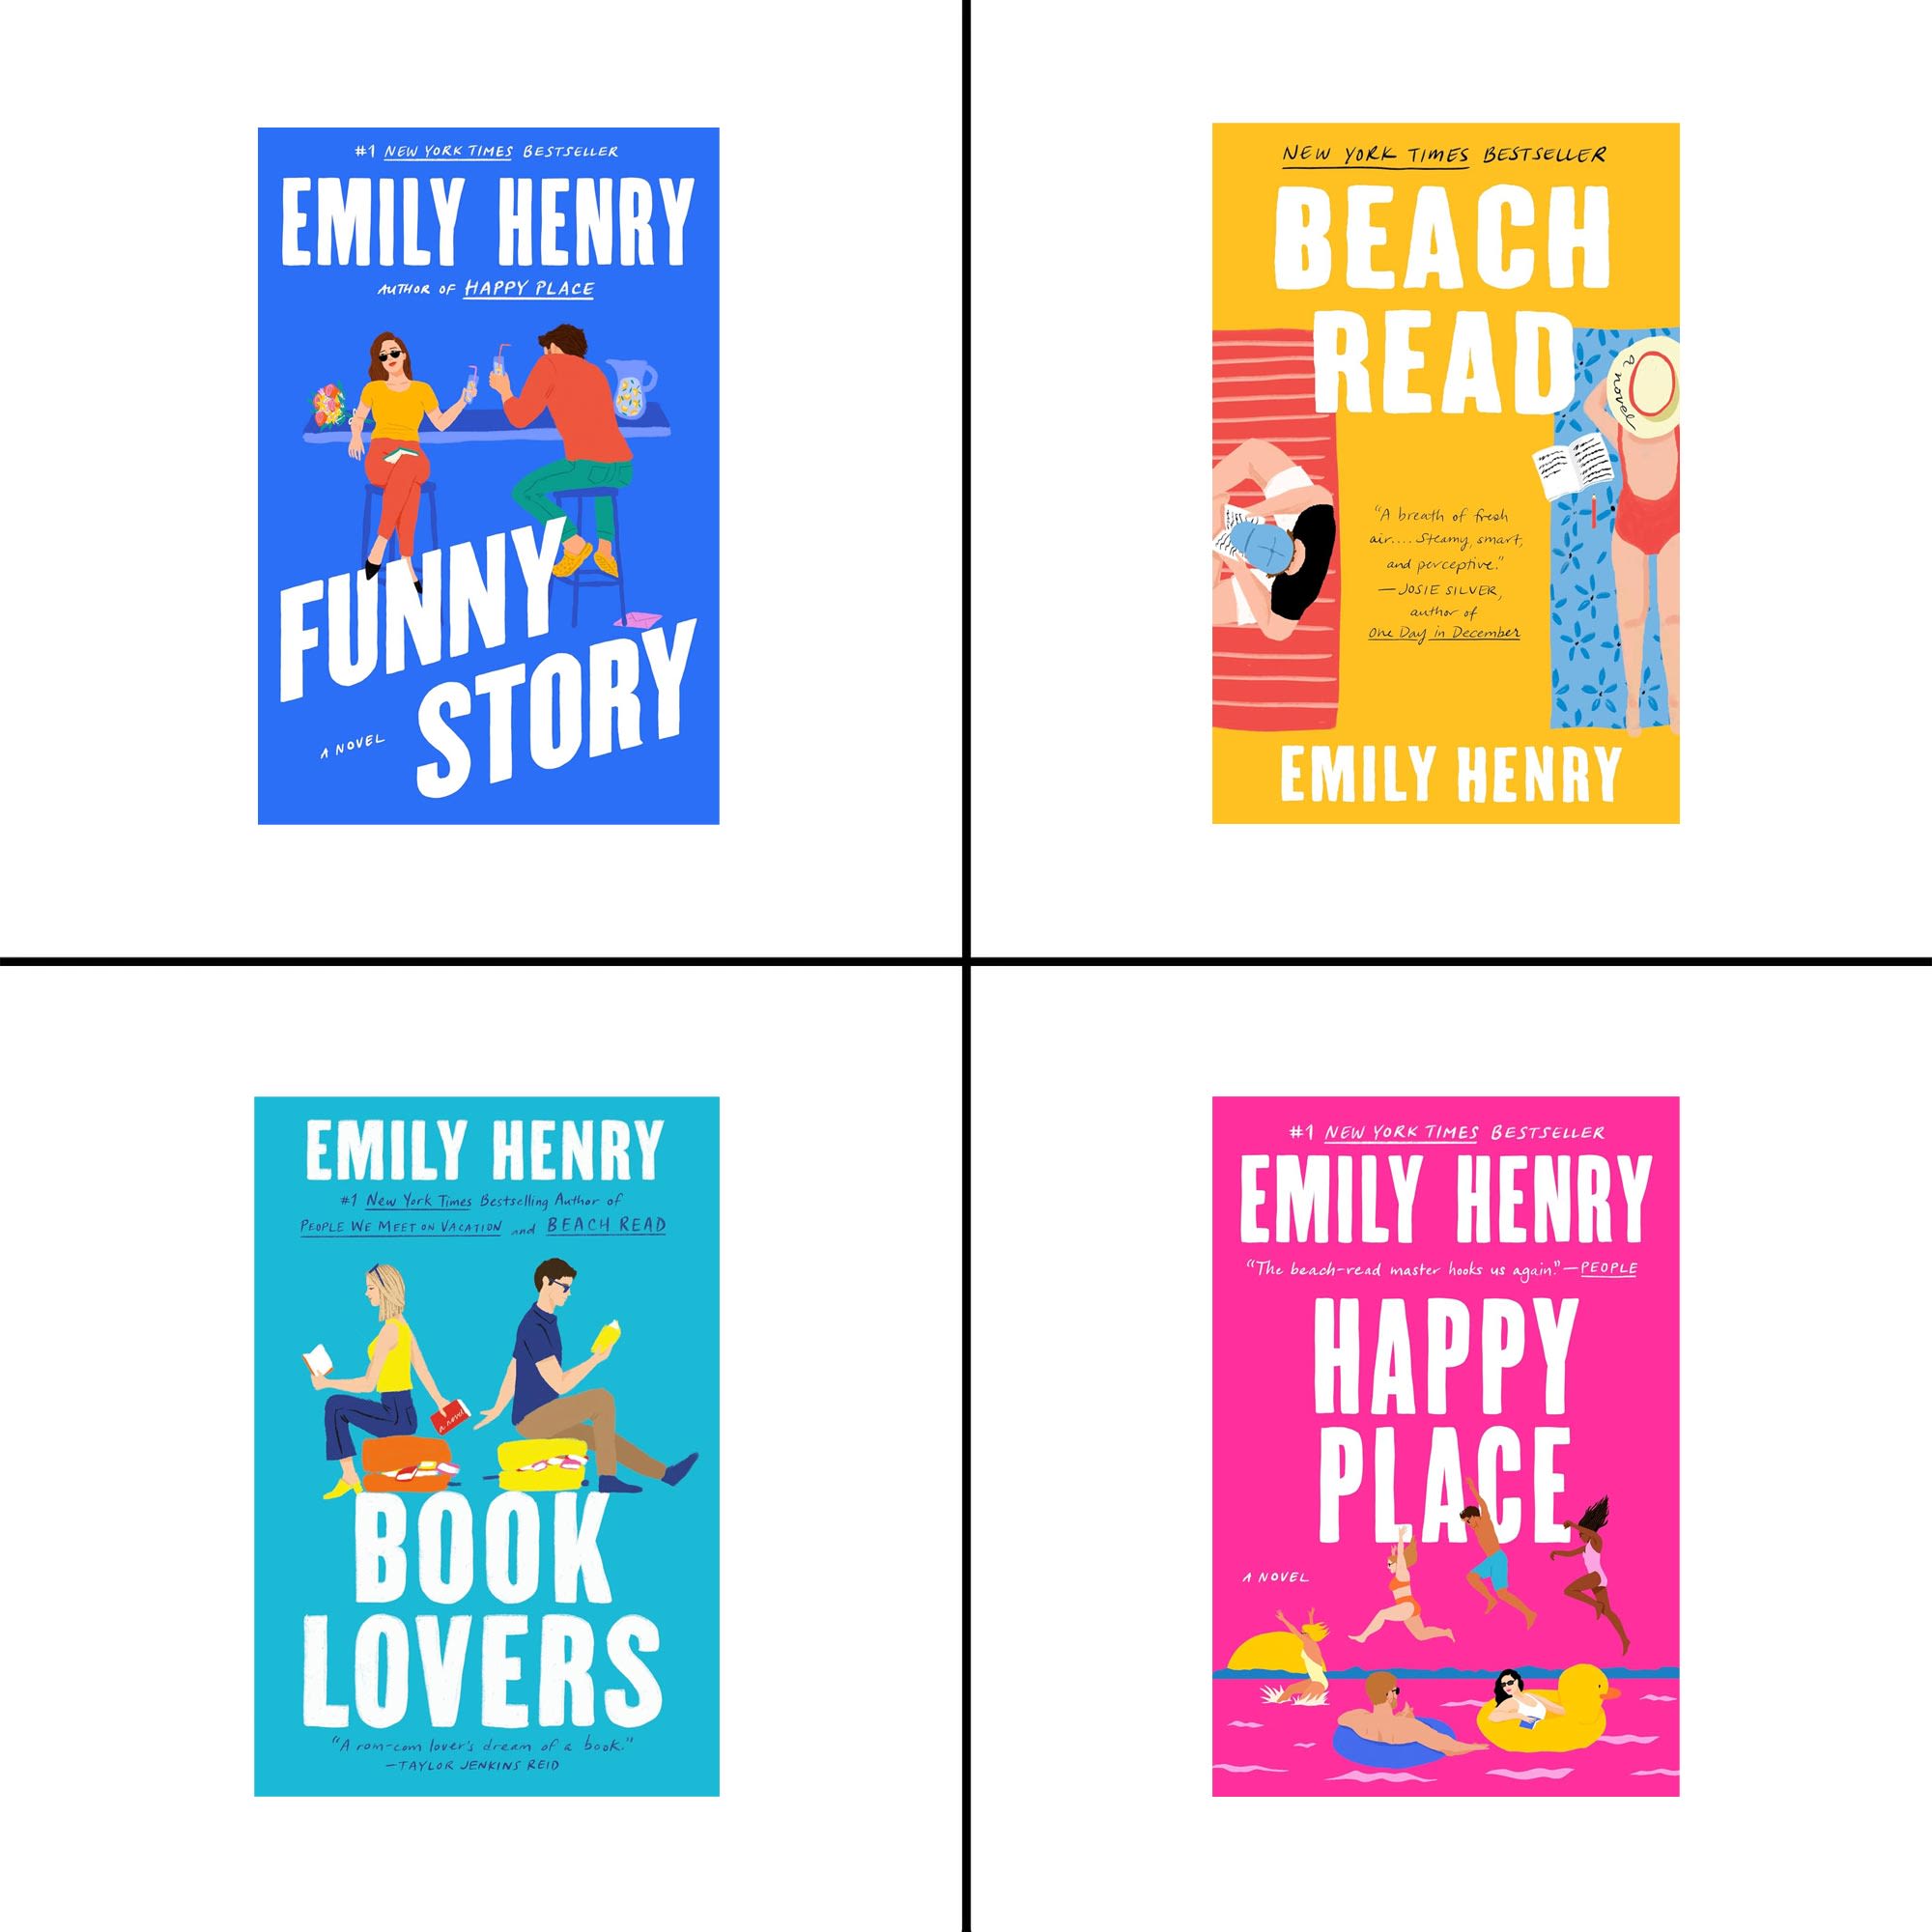 A Guide to All of Emily Henry’s Upcoming Book-to-Screen Adaptations: ‘Funny Story’ and More